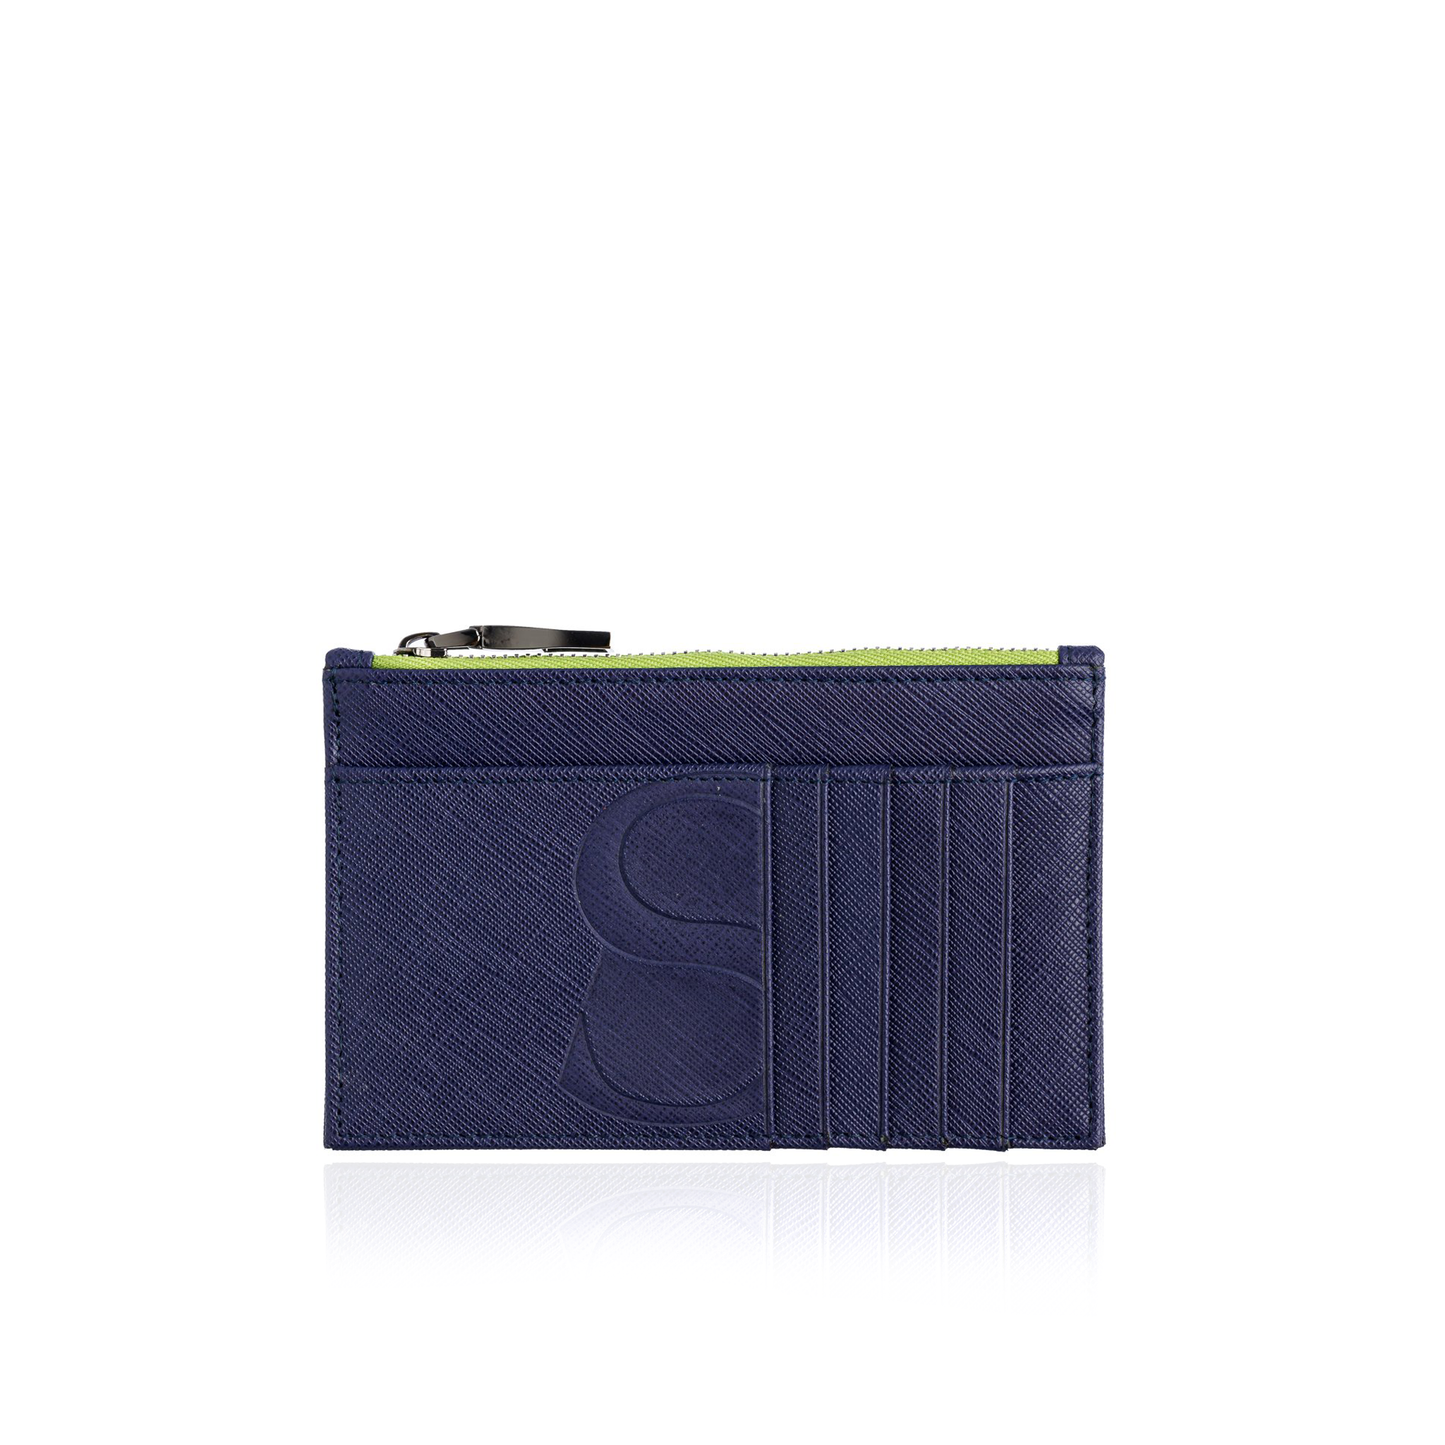 Credit Card Zip Pouch in Blue Textured Leather